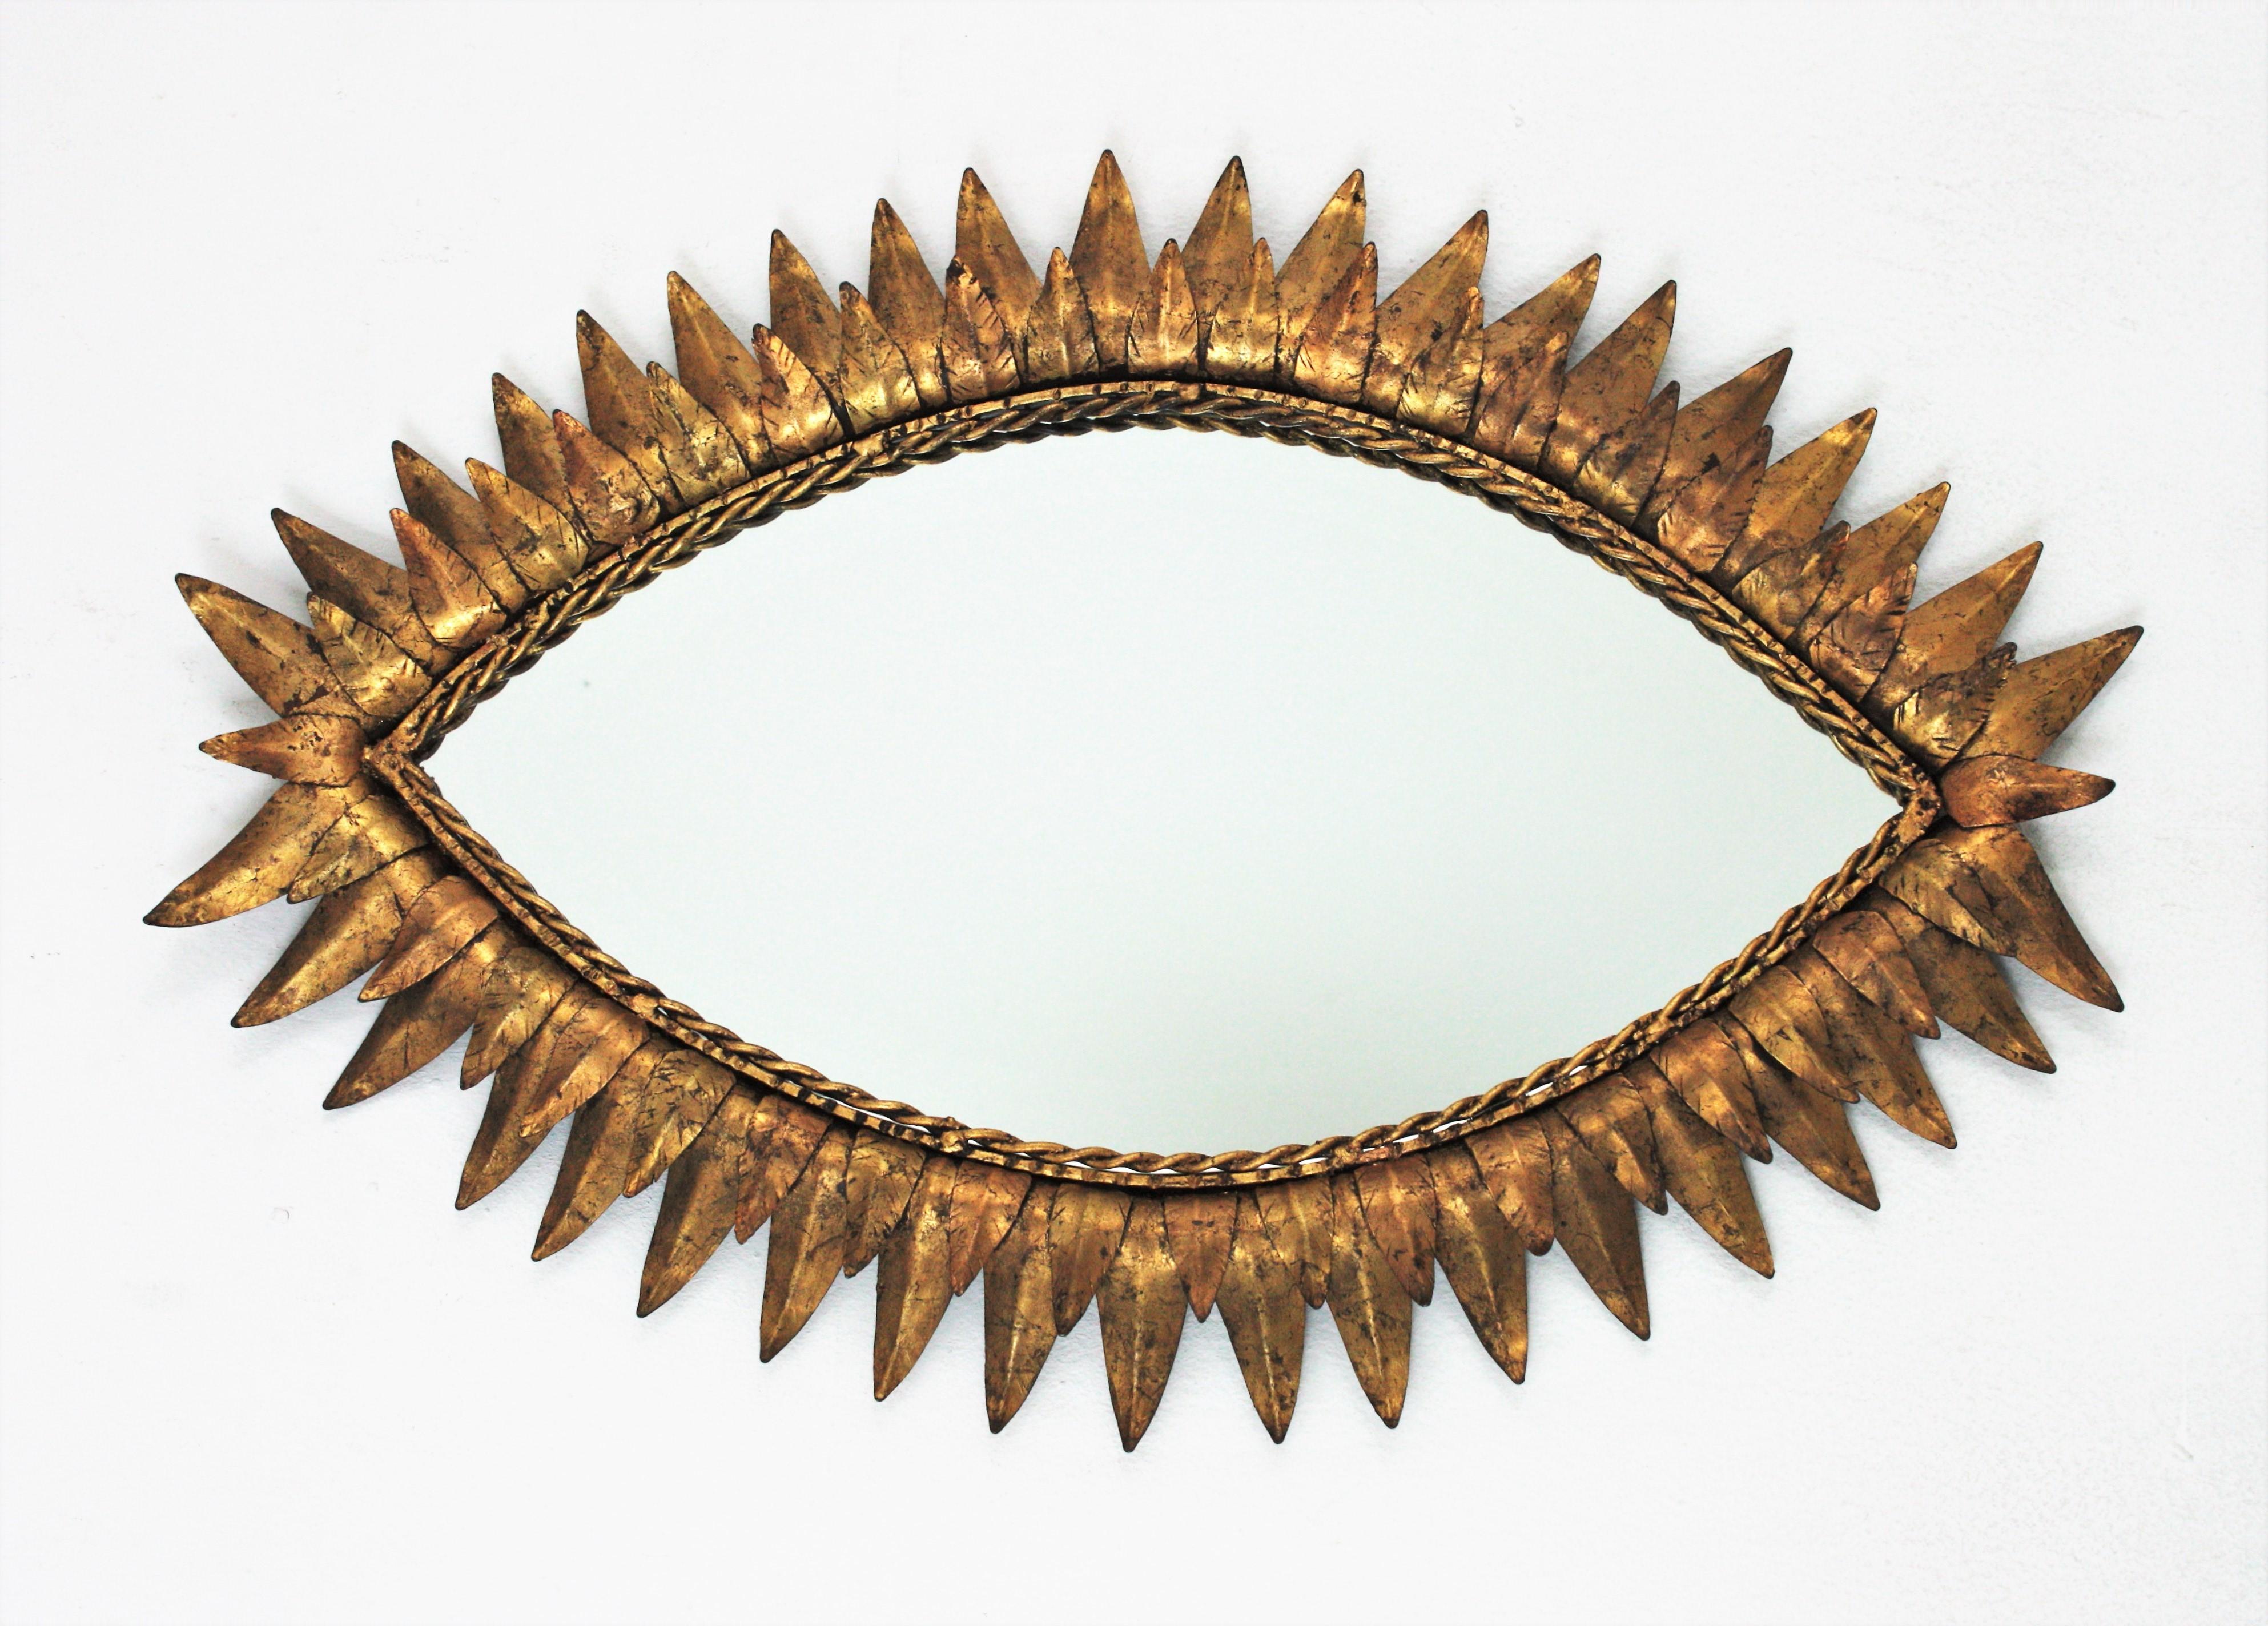 Mid-Century Modern eye shaped sunburst mirror, wrought iron, gold leaf, Spain, 1950s.
This pretty beautiful sunburst mirror features a double layered leafed frame in the shape of an eye. It has a nice color and patina and it shows its original gold